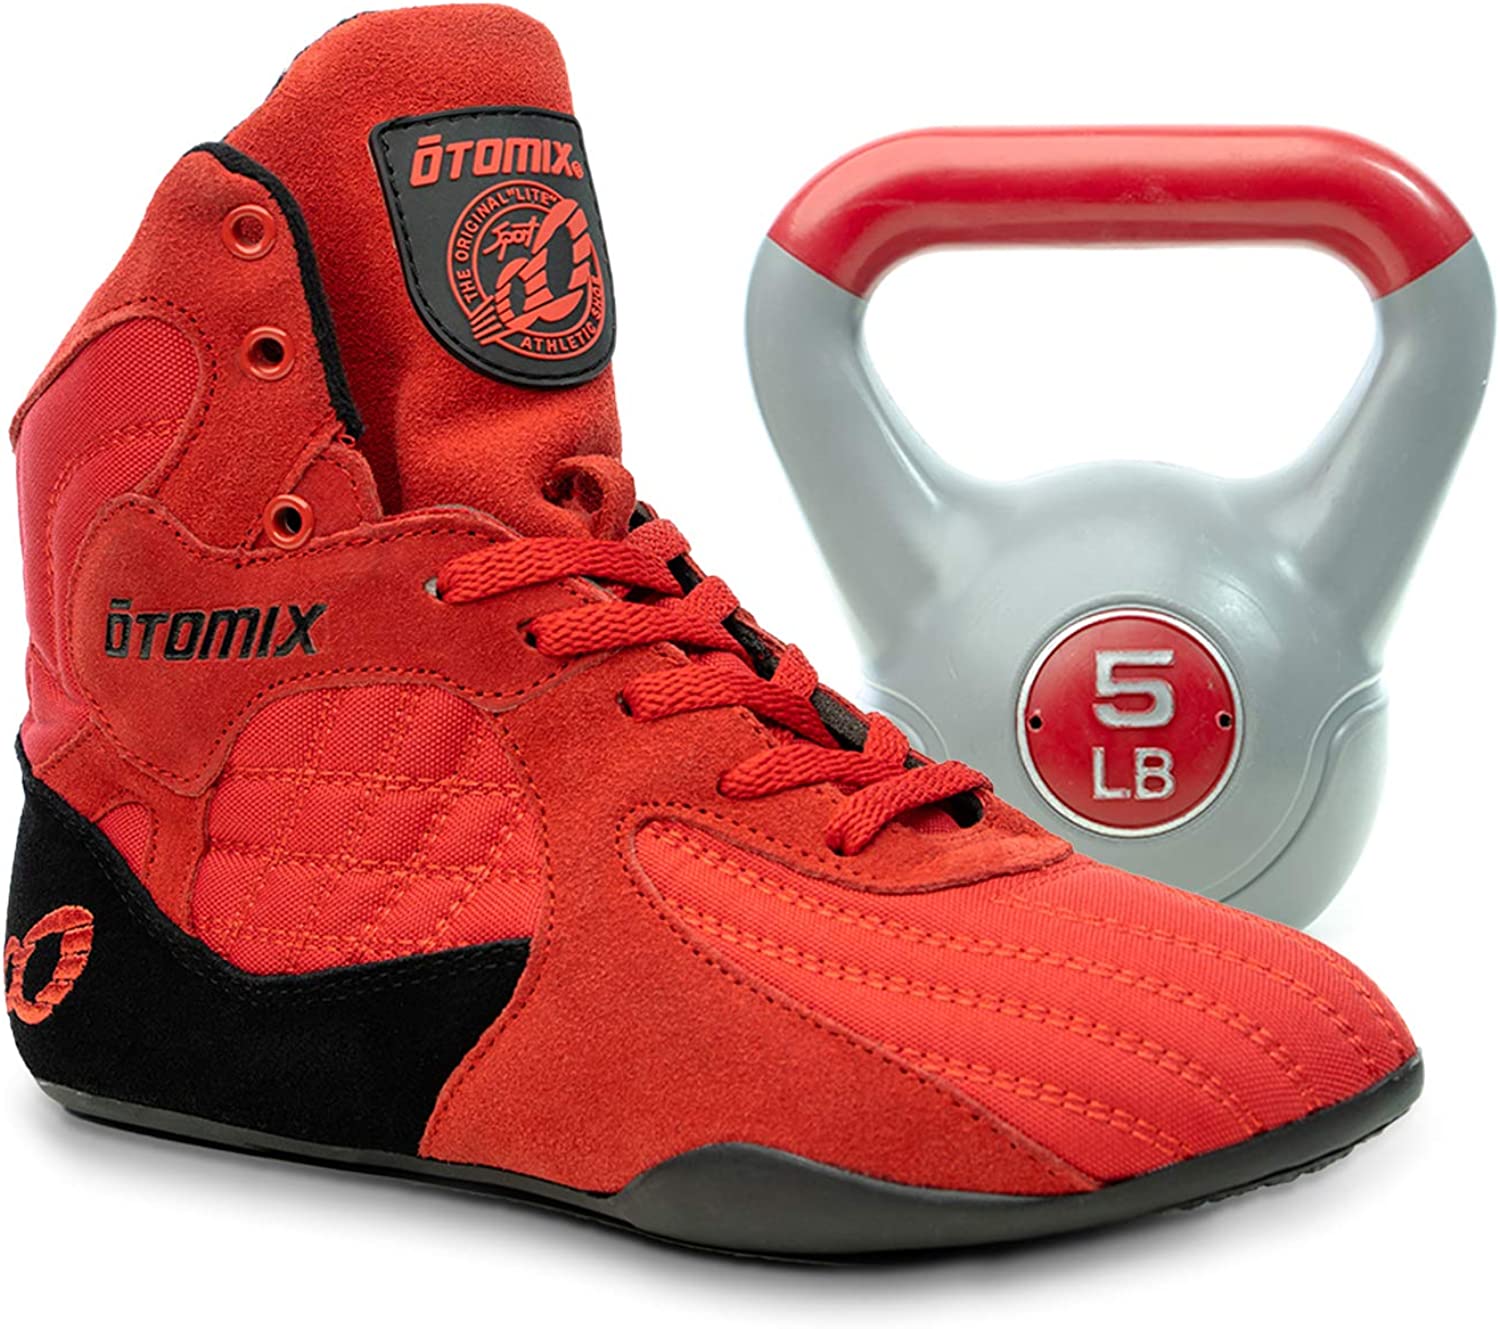 Otomix Red Stingray Escape Weightlifting & Grappling Shoe (Size 7.5) - image 5 of 5